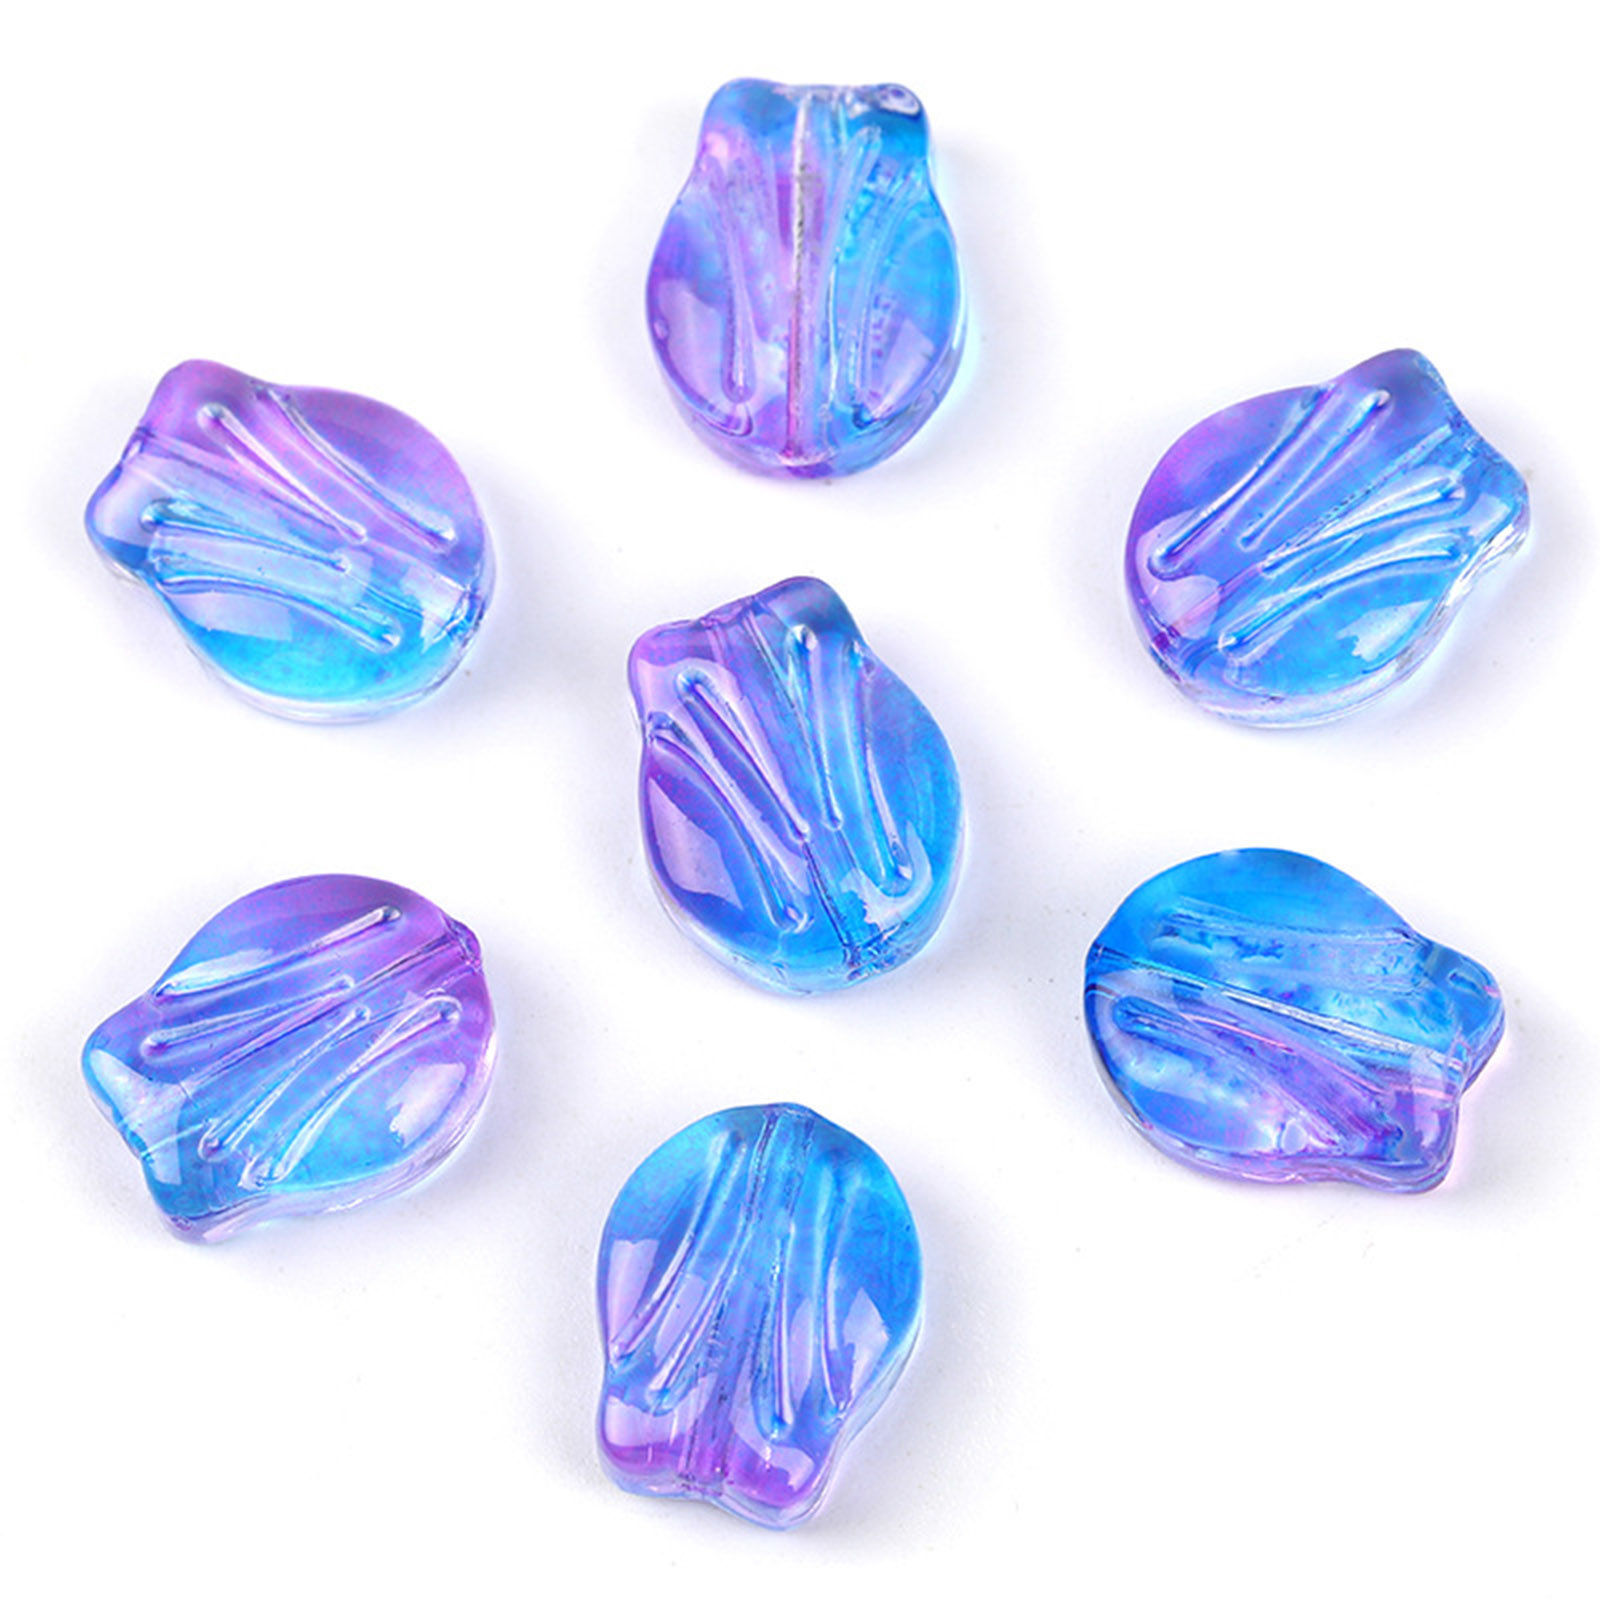 Picture of Lampwork Glass Beads Tulip Flower Purple & Blue Gradient Color About 10.5mm x 8.4mm, Hole: Approx 0.8mm, 20 PCs